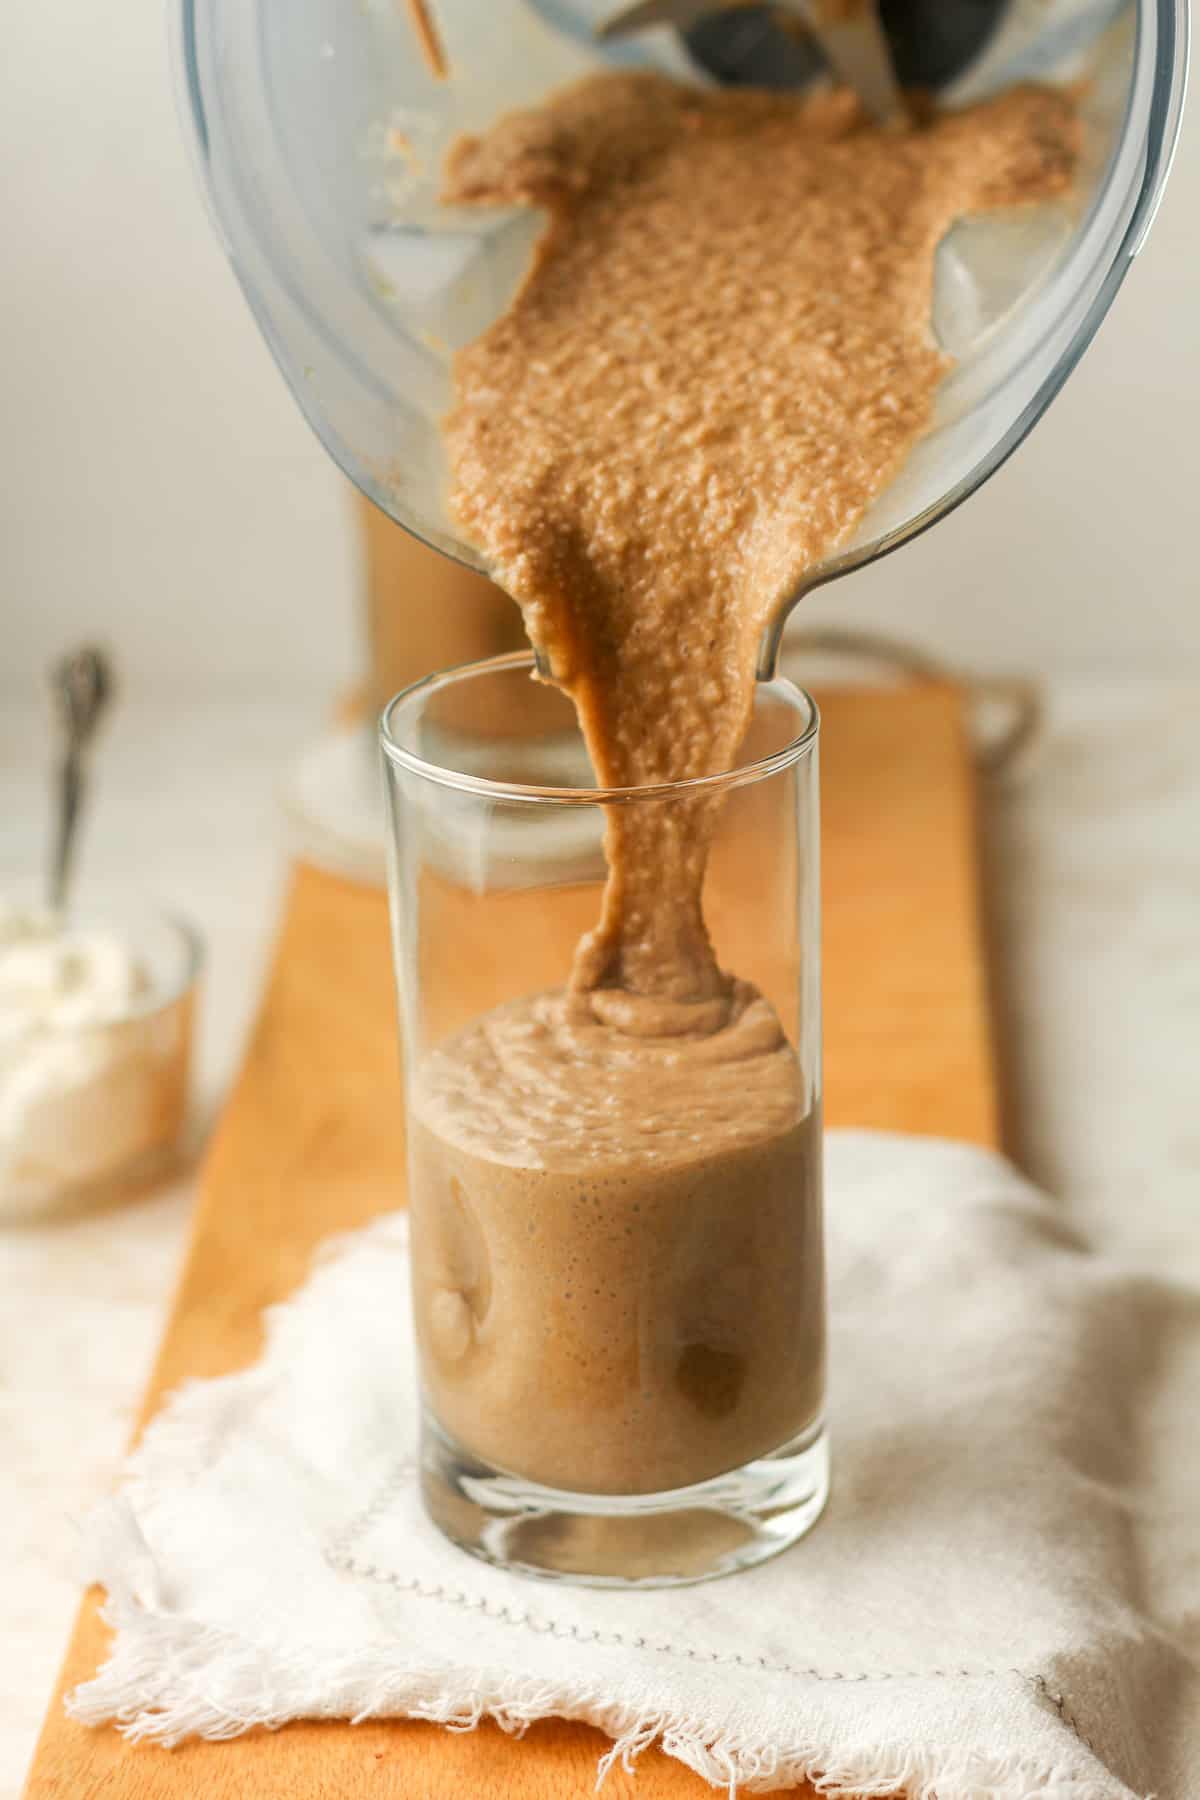 The coffee smoothie pouring into a glass.